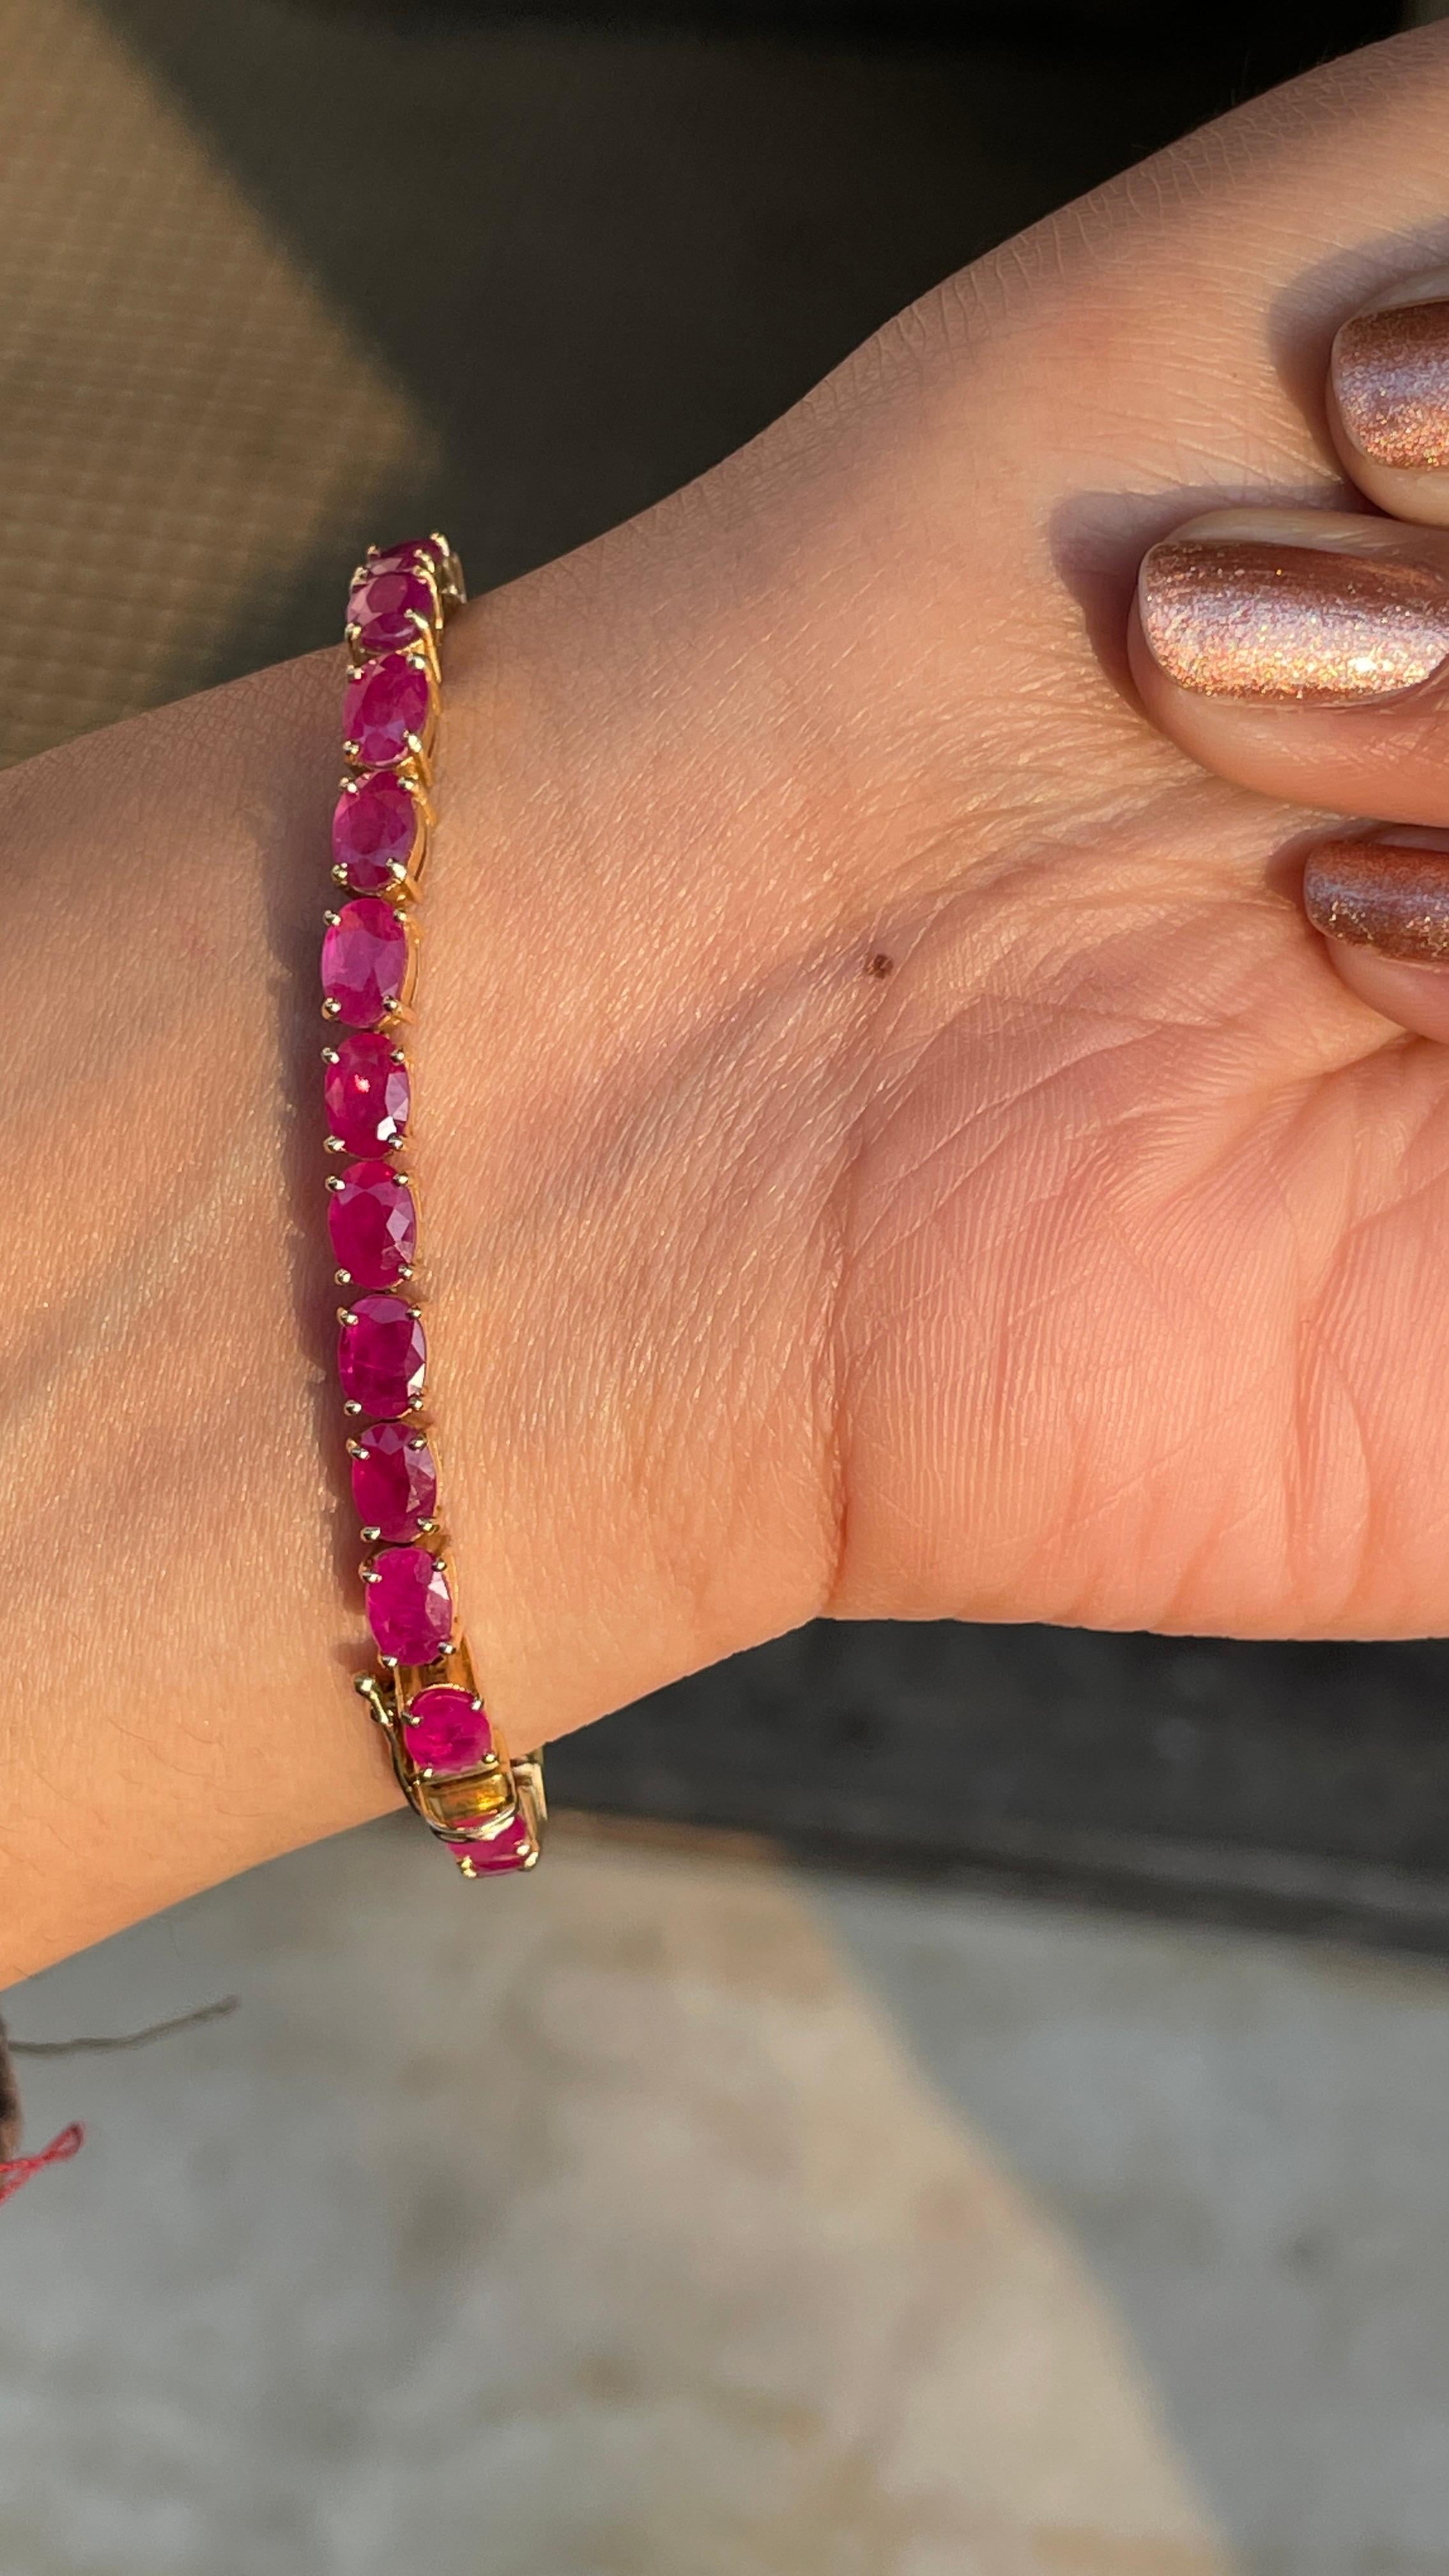 Ruby bracelet in 18K Gold. It has a perfect oval cut gemstone to make you stand out on any occasion or an event.
A tennis bracelet is an essential piece of jewelry when it comes to your wedding day. The sleek and elegant style complements the attire